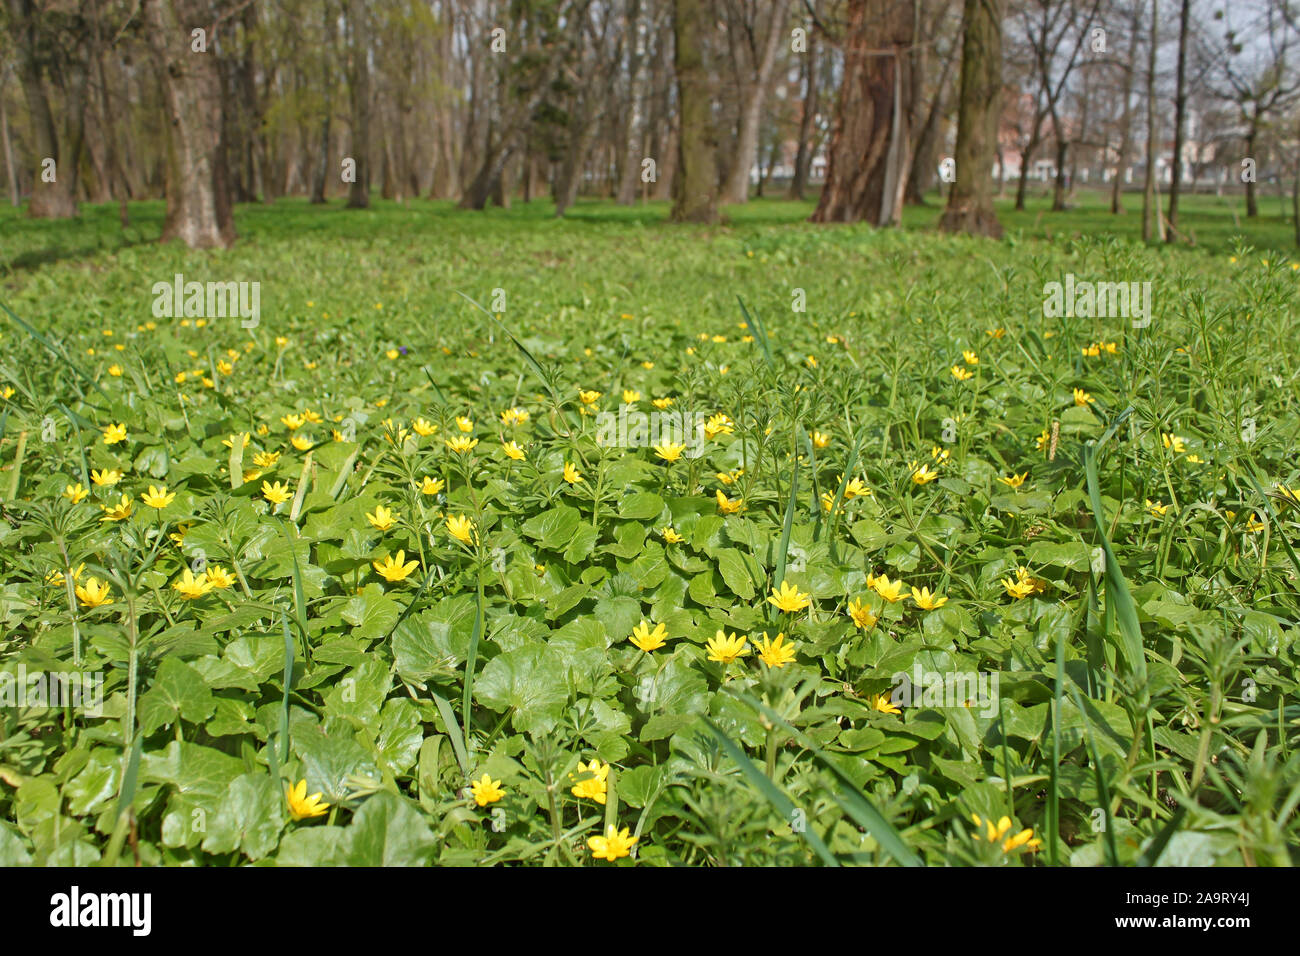 Flowering plants of lesser celandine (Latin name: Ficaria verna) on a lawn at park in early April Stock Photo